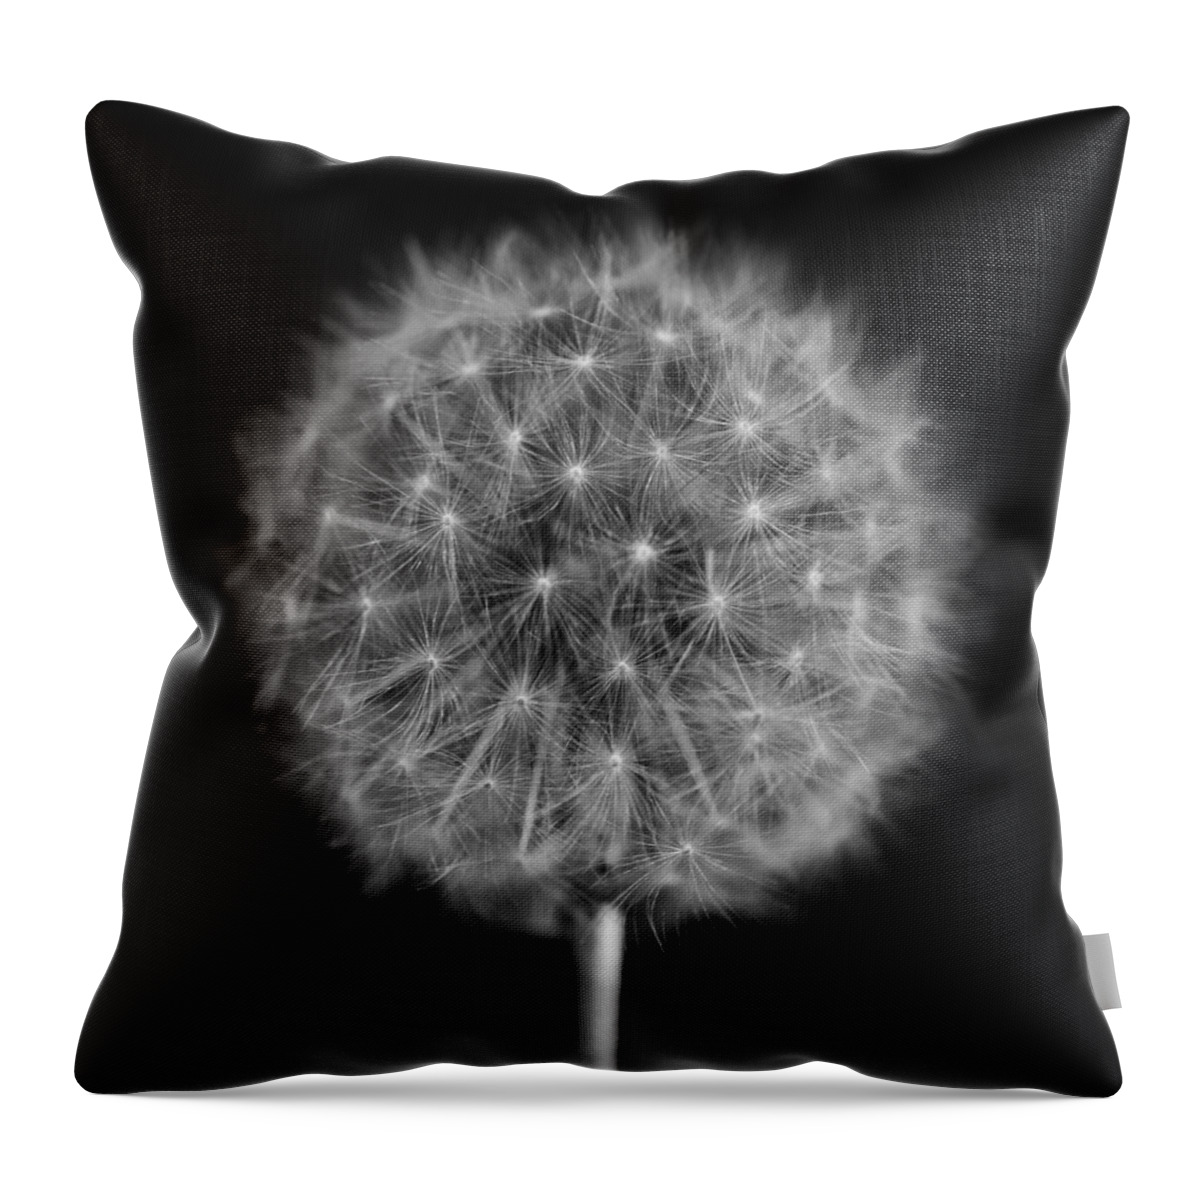 Dandelion Throw Pillow featuring the photograph Bw12 by Charles Harden